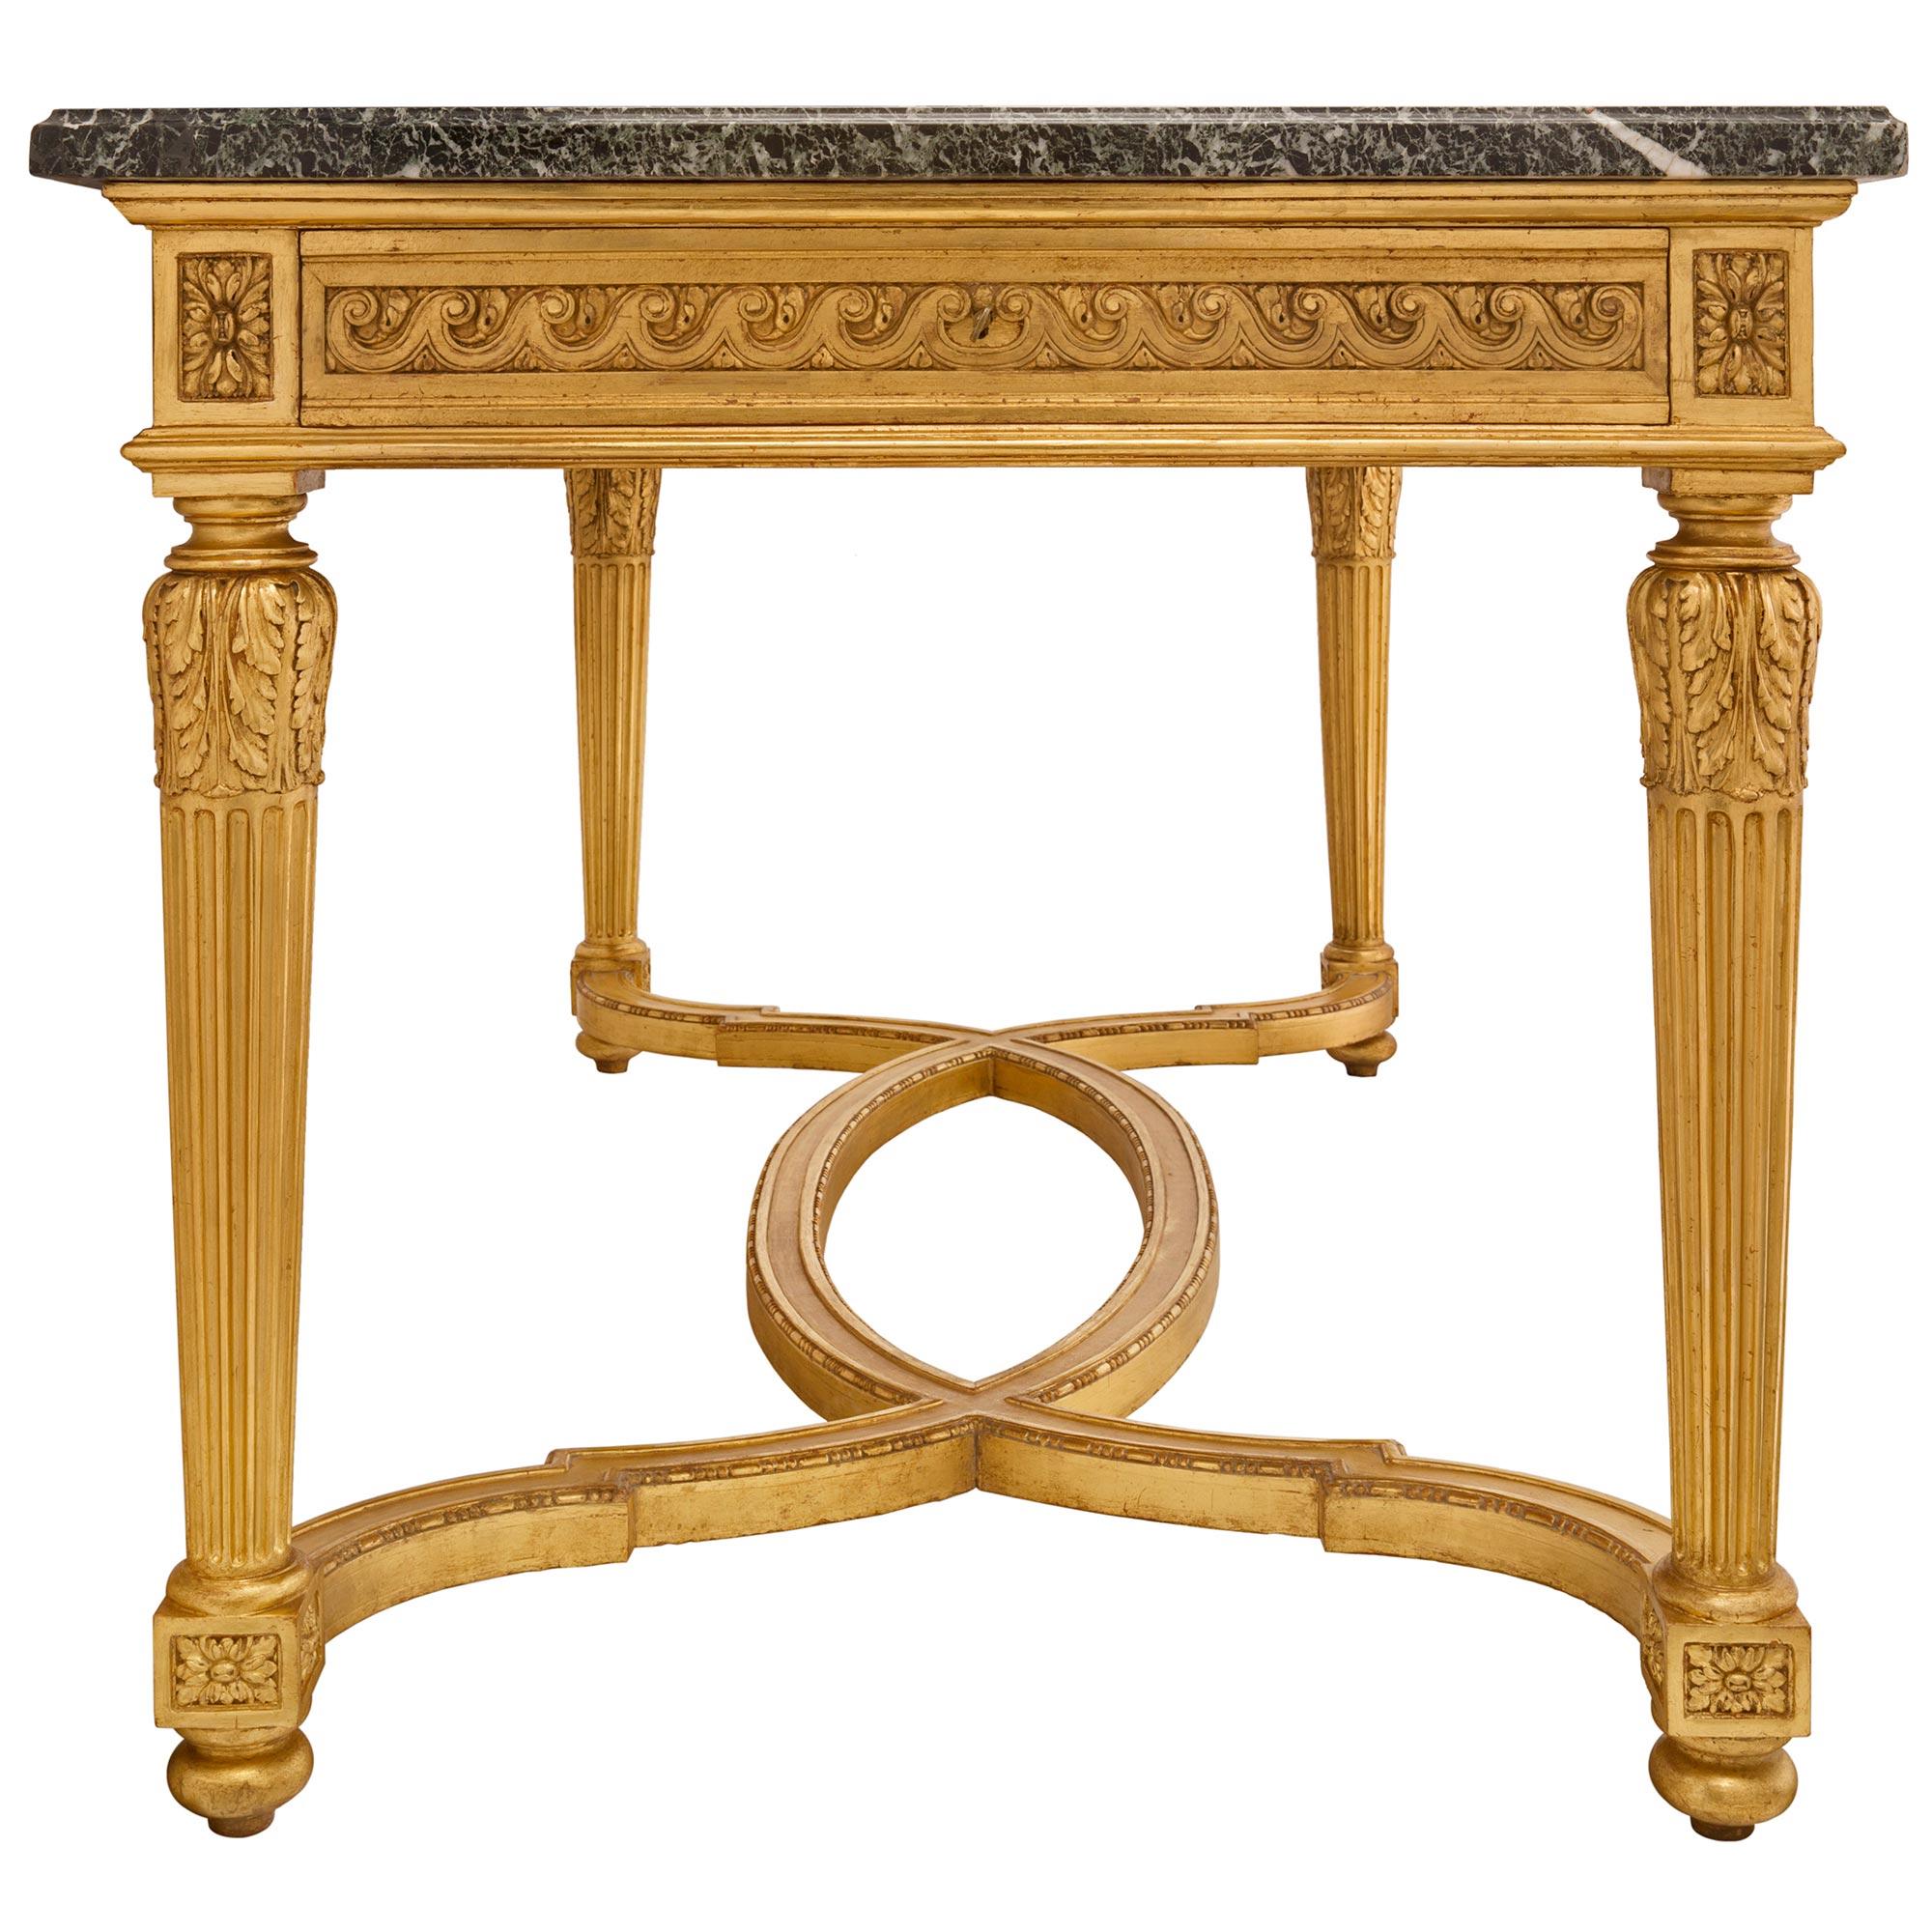 19th Century Louis XVI Style Giltwood and Vert Antique Marble Center Table For Sale 2